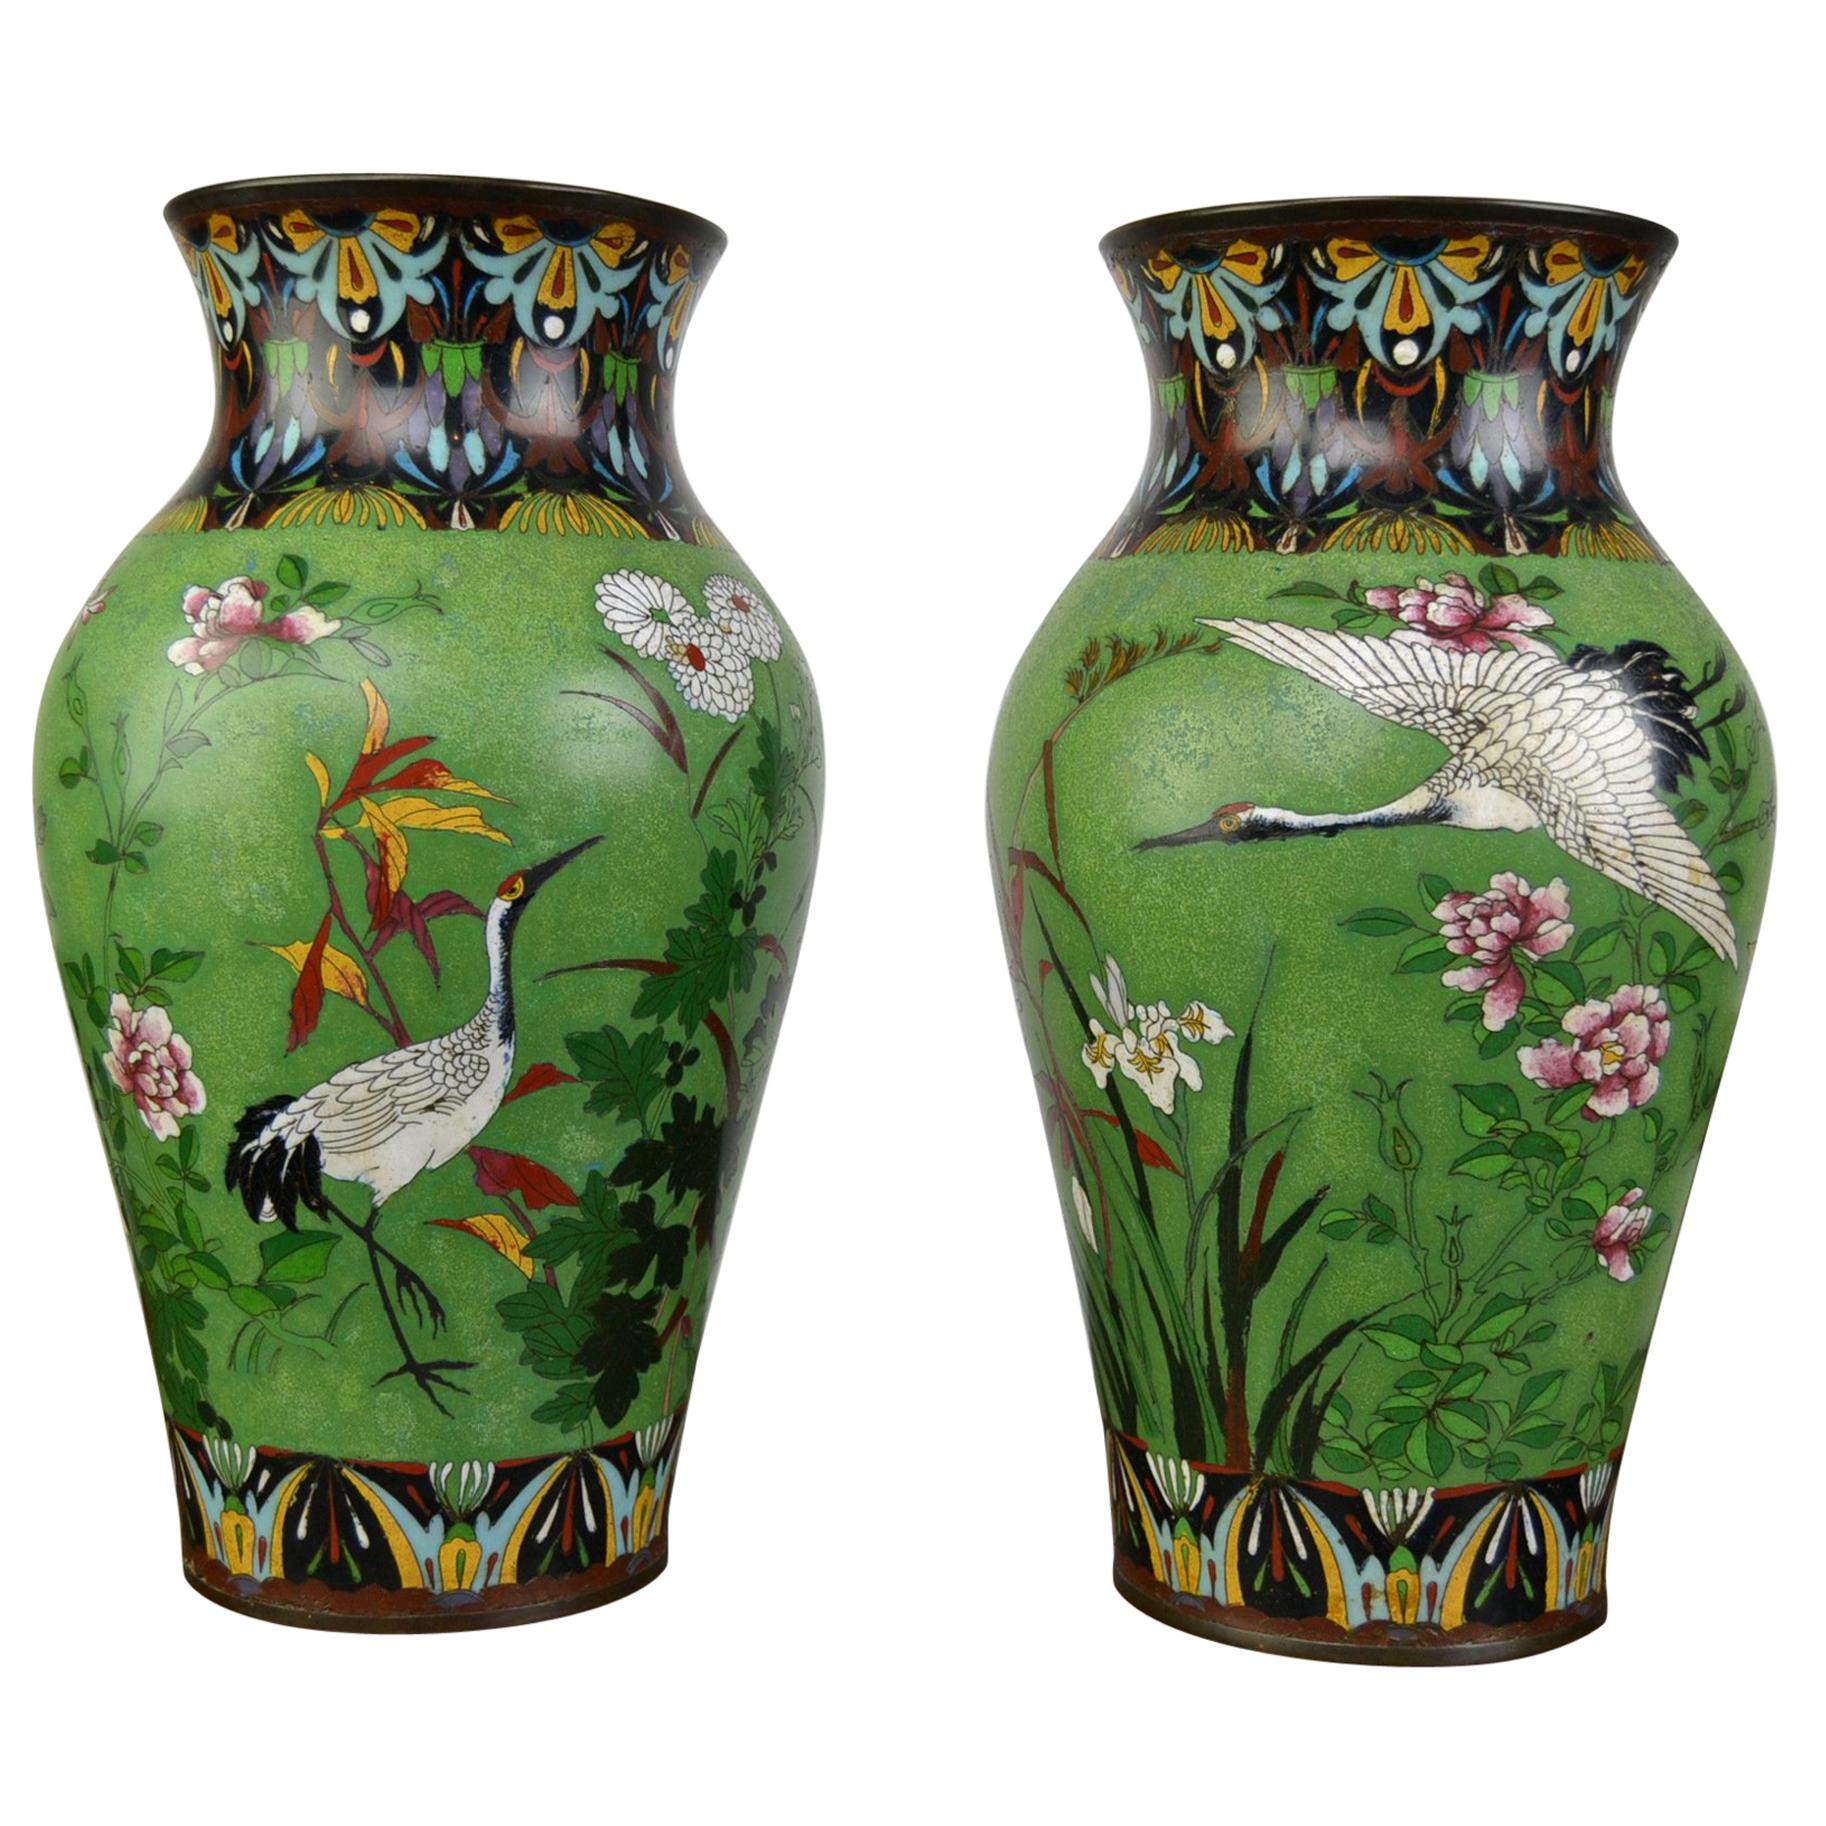 Pair of Japanese Cloisonne Enamel on Copper Vases with Crane Birds and Flowers 